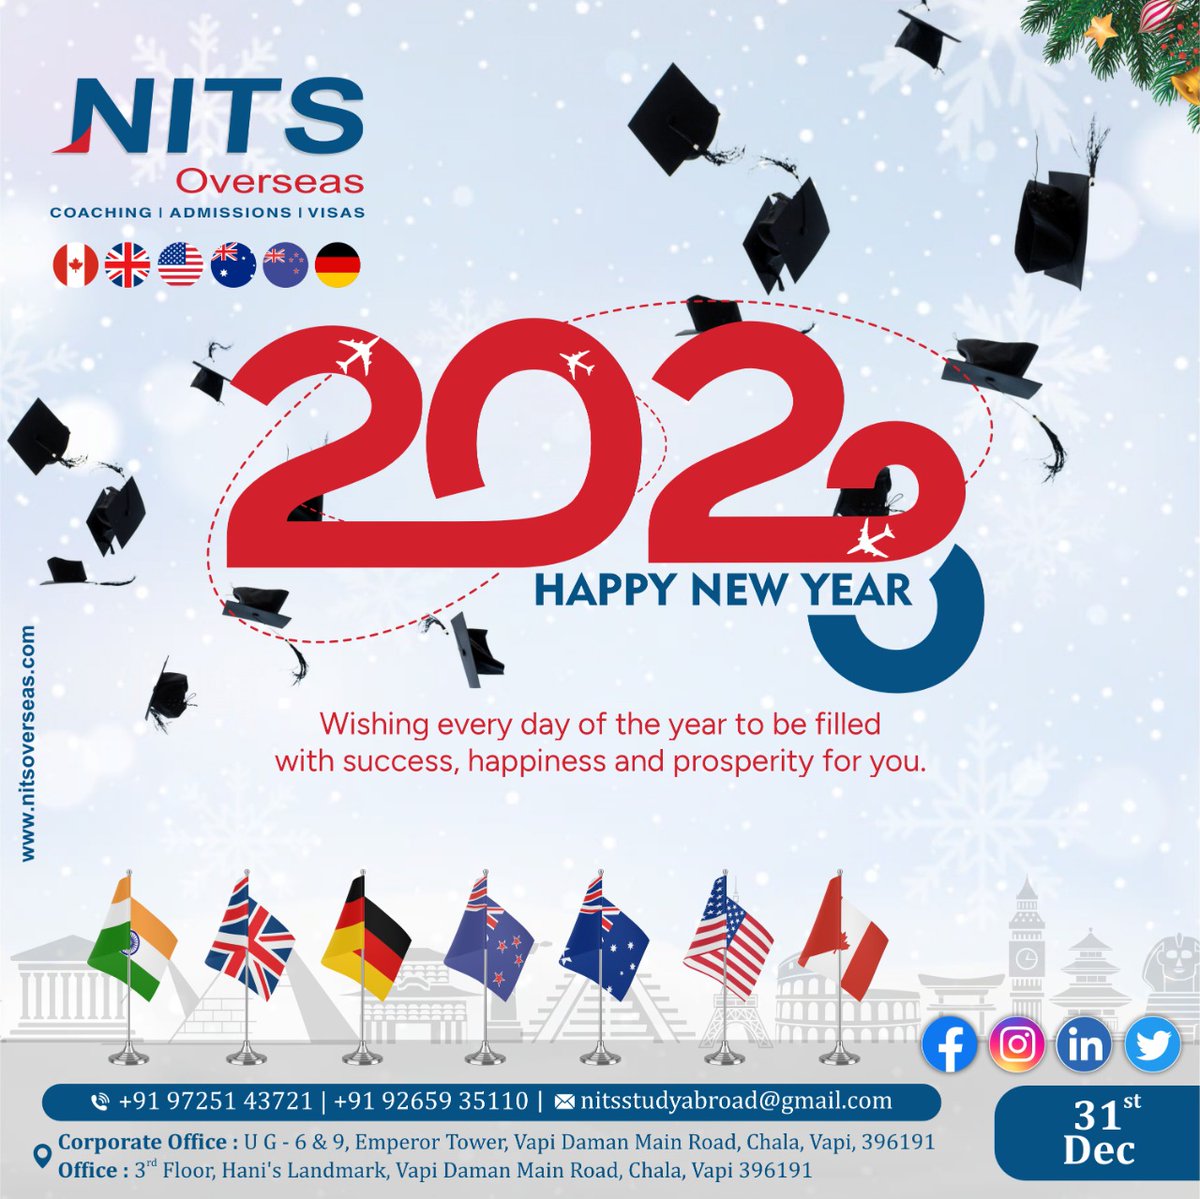 Tomorrow is the first blank page of a 365-page book. Write a good one. Happy New Year 2023!!

#happynewyear #newyear2023 #workvisa #workvisaaustralia #visitorvisa #touristvisa #nitsoverseas #studyabroad #education #ielts #study #studentvisa #studyoverseas #visa #student